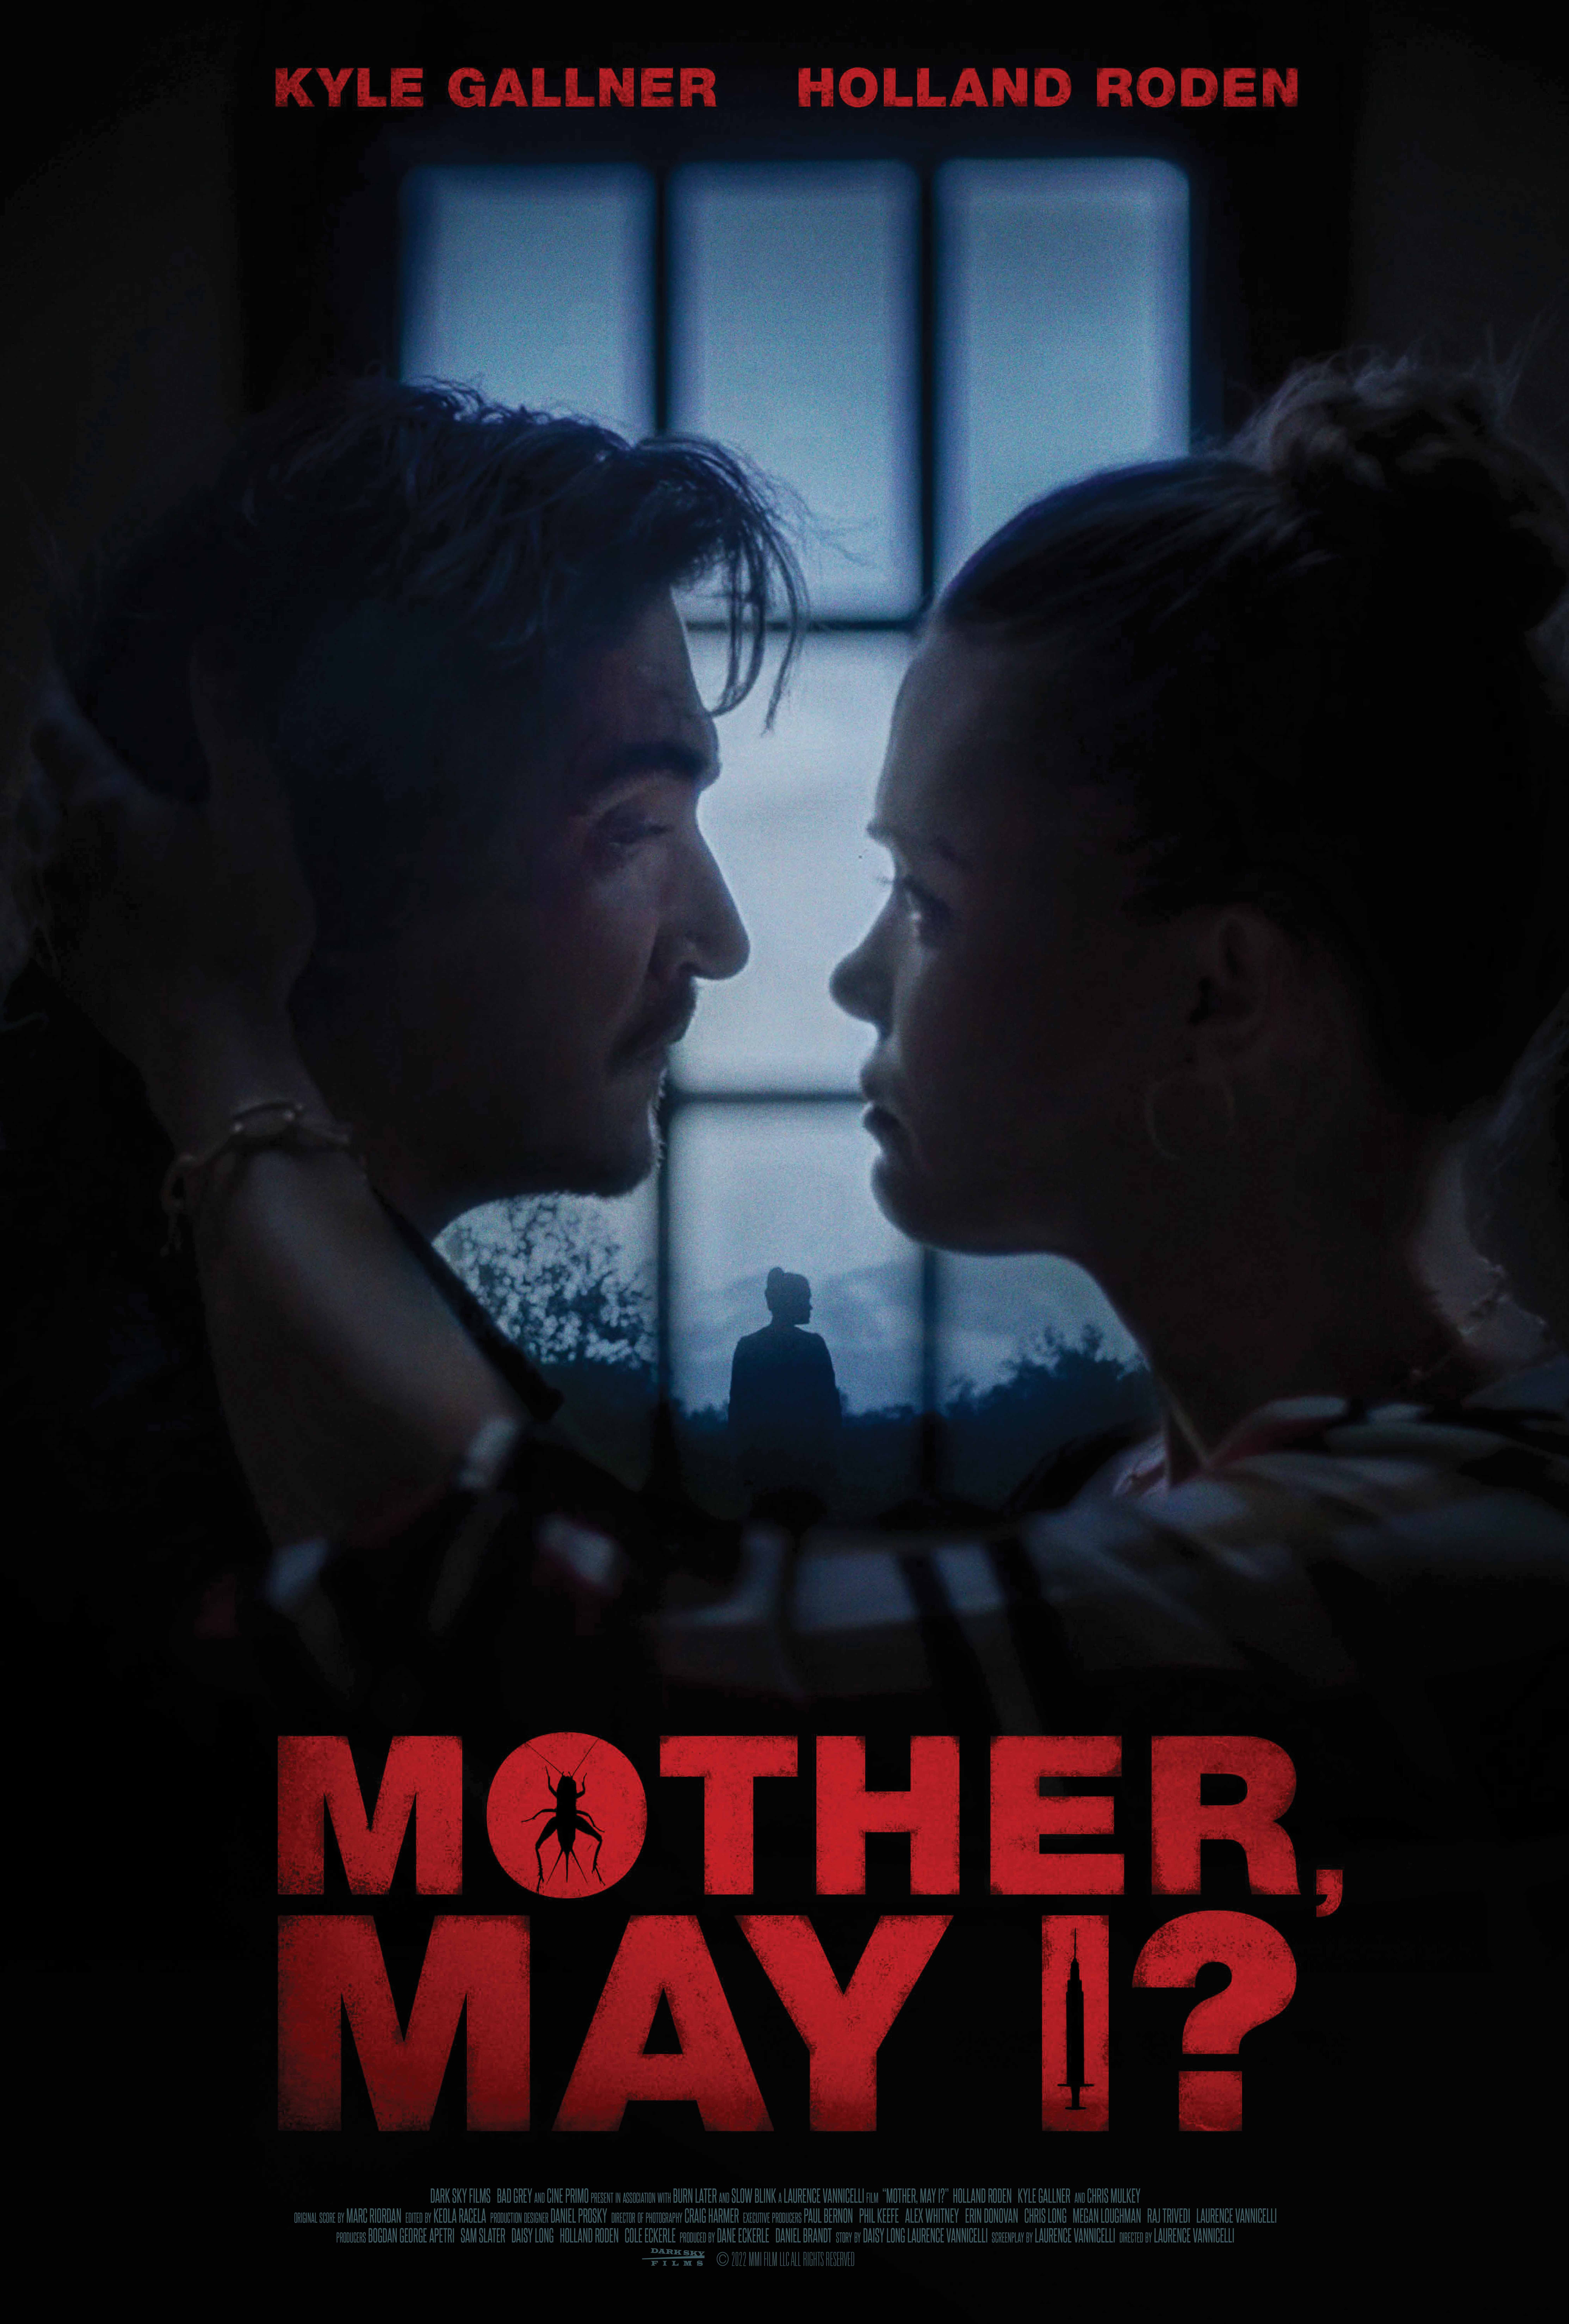 "Mother, May I?" - A Riveting Psychological Thriller Featuring Kyle Gallner and Holland Roden Set to Hit Theaters and VOD on July 21st 36